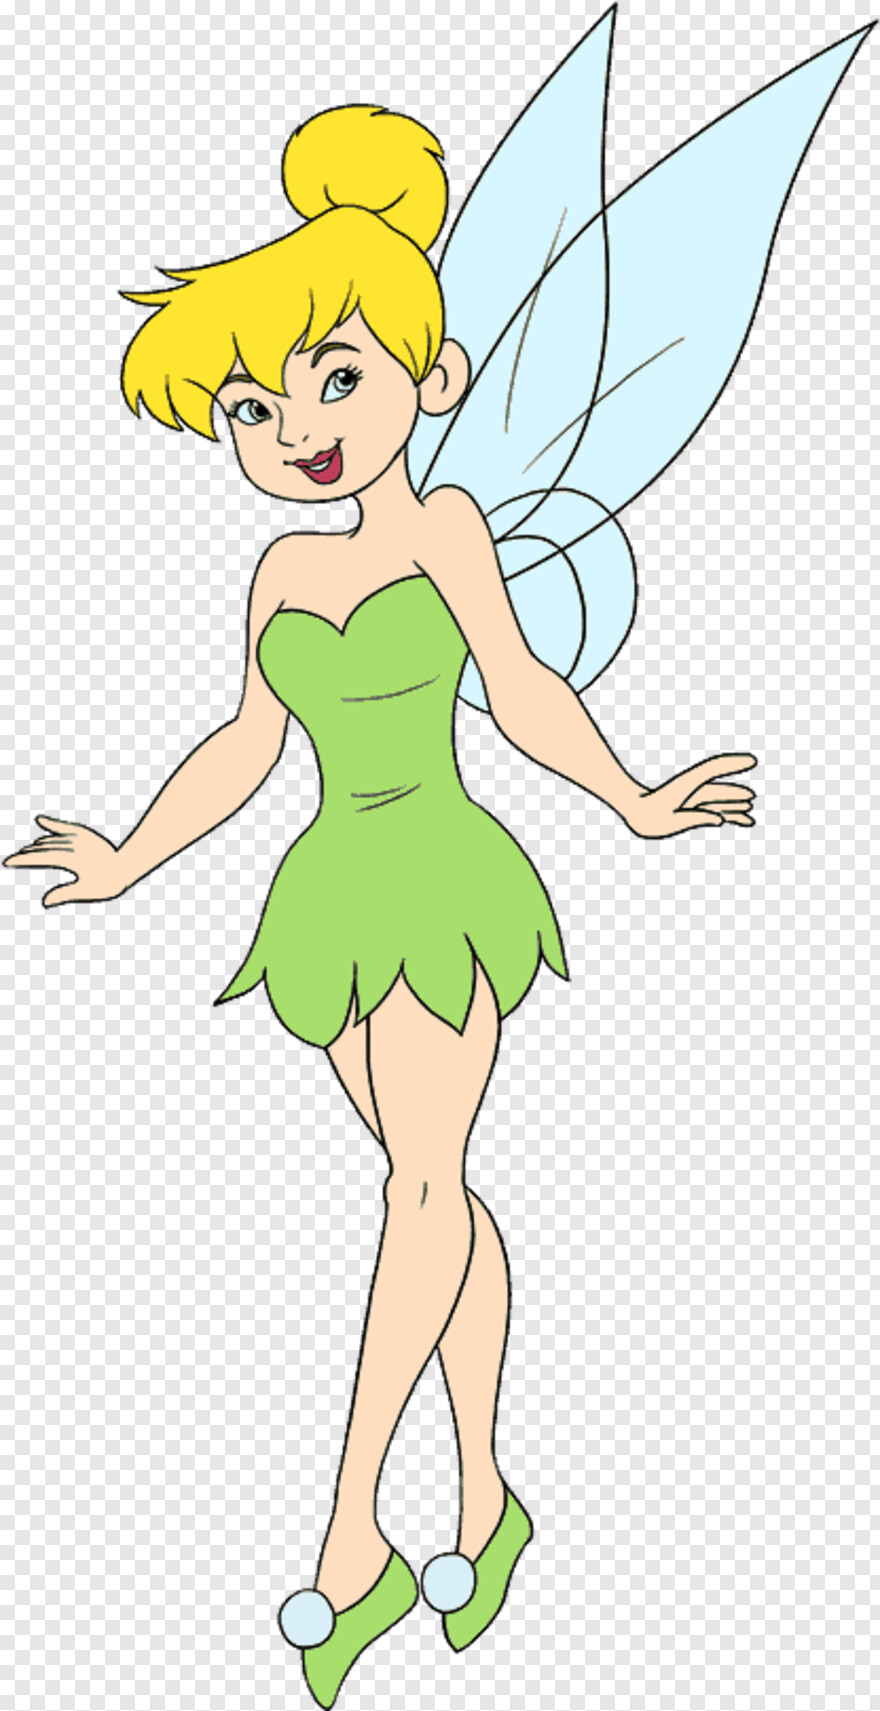 tinkerbell-silhouette # 1059516